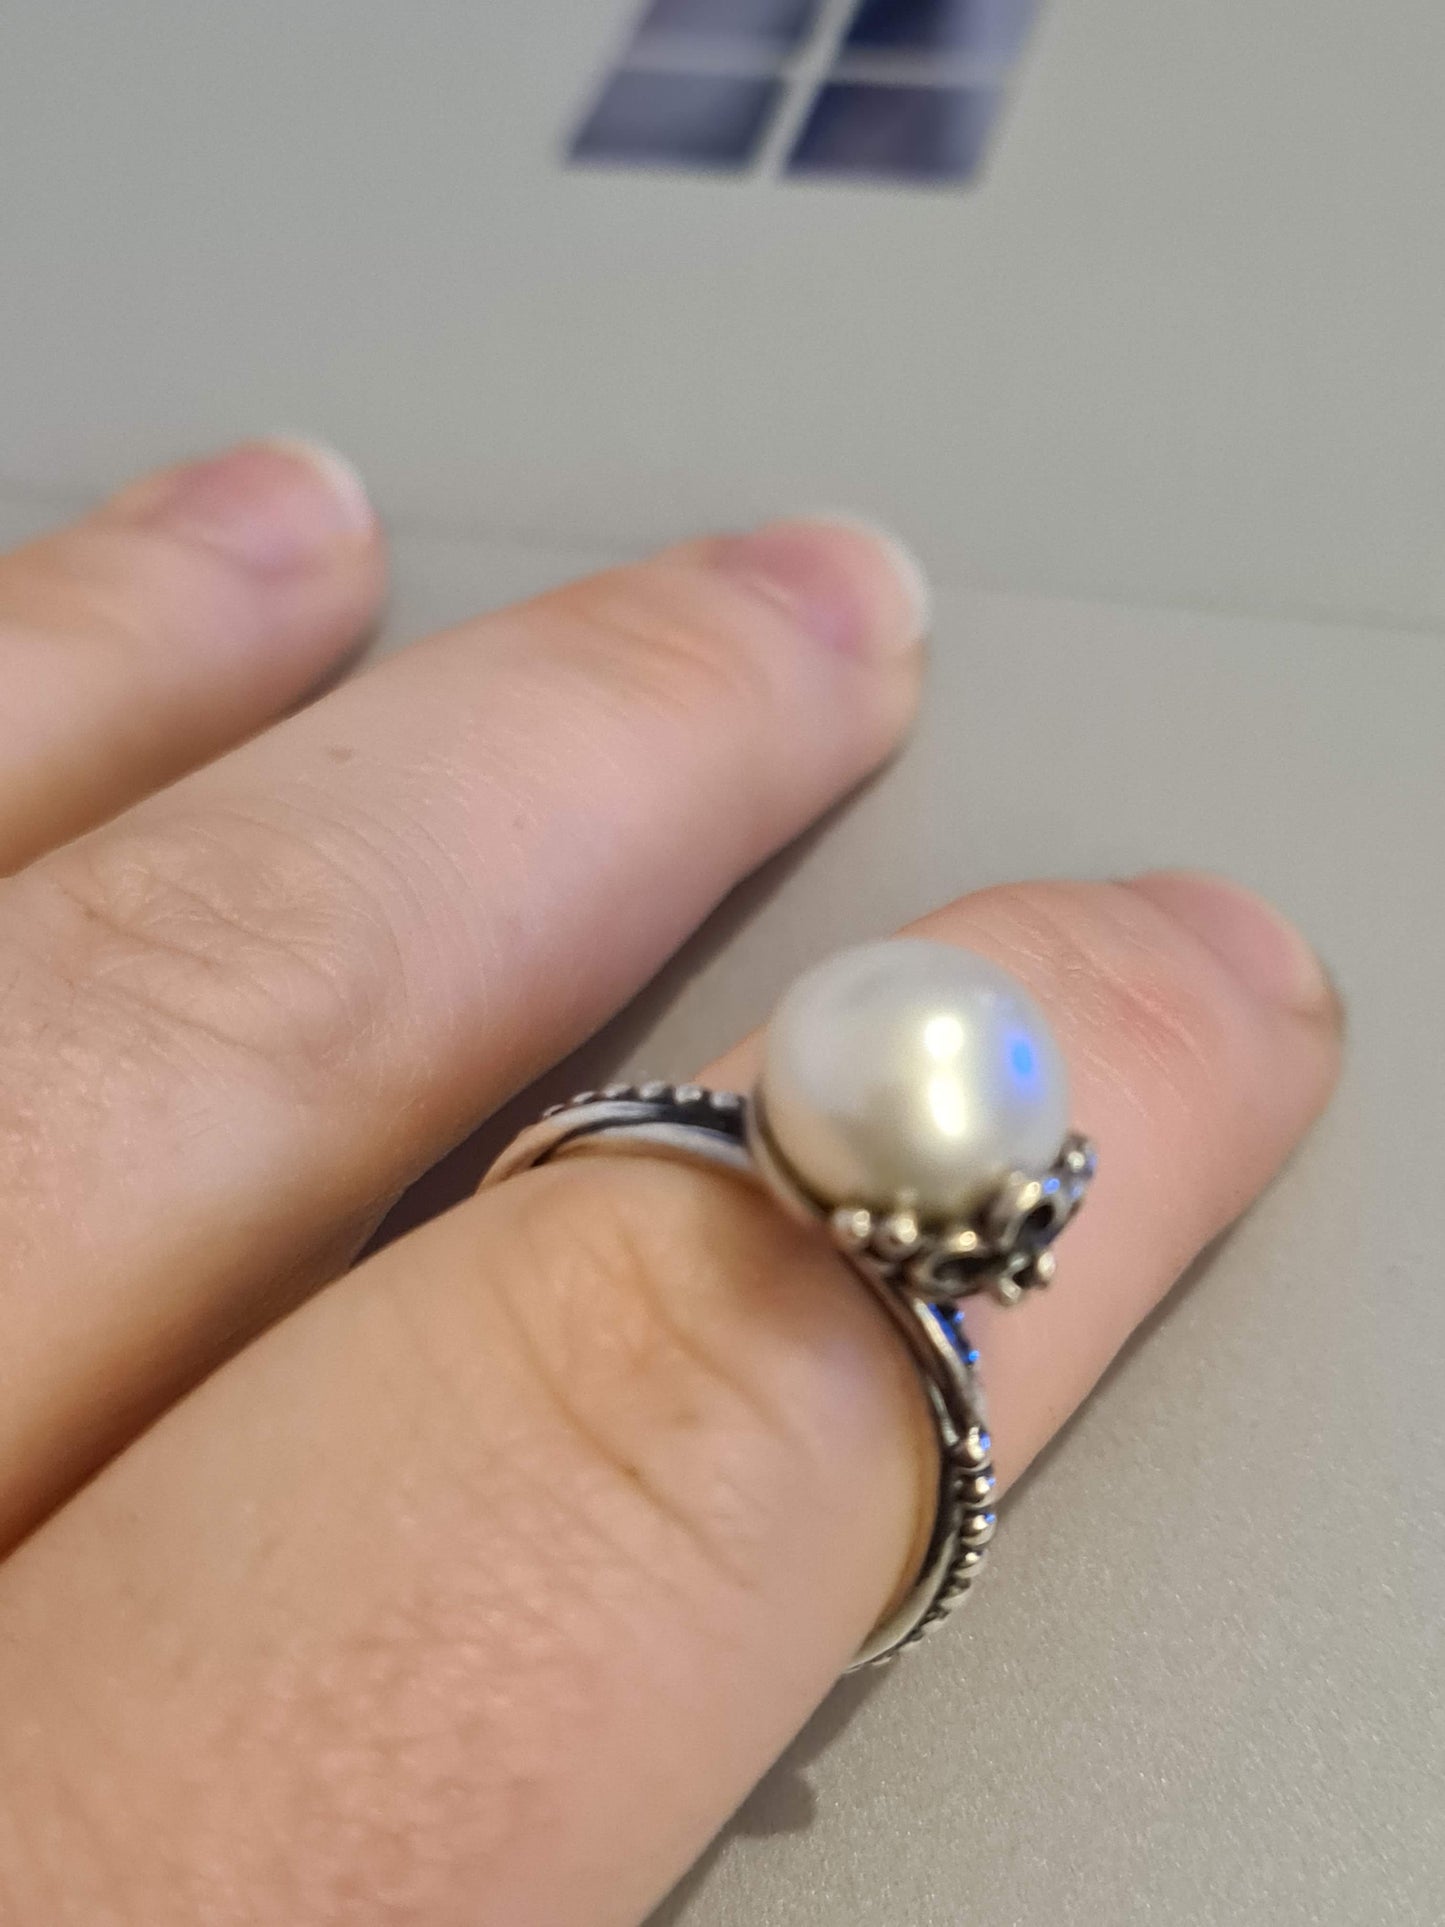 Genuine Pandora Pearl Odyssey Ring with Black Stone on Flower Size 60